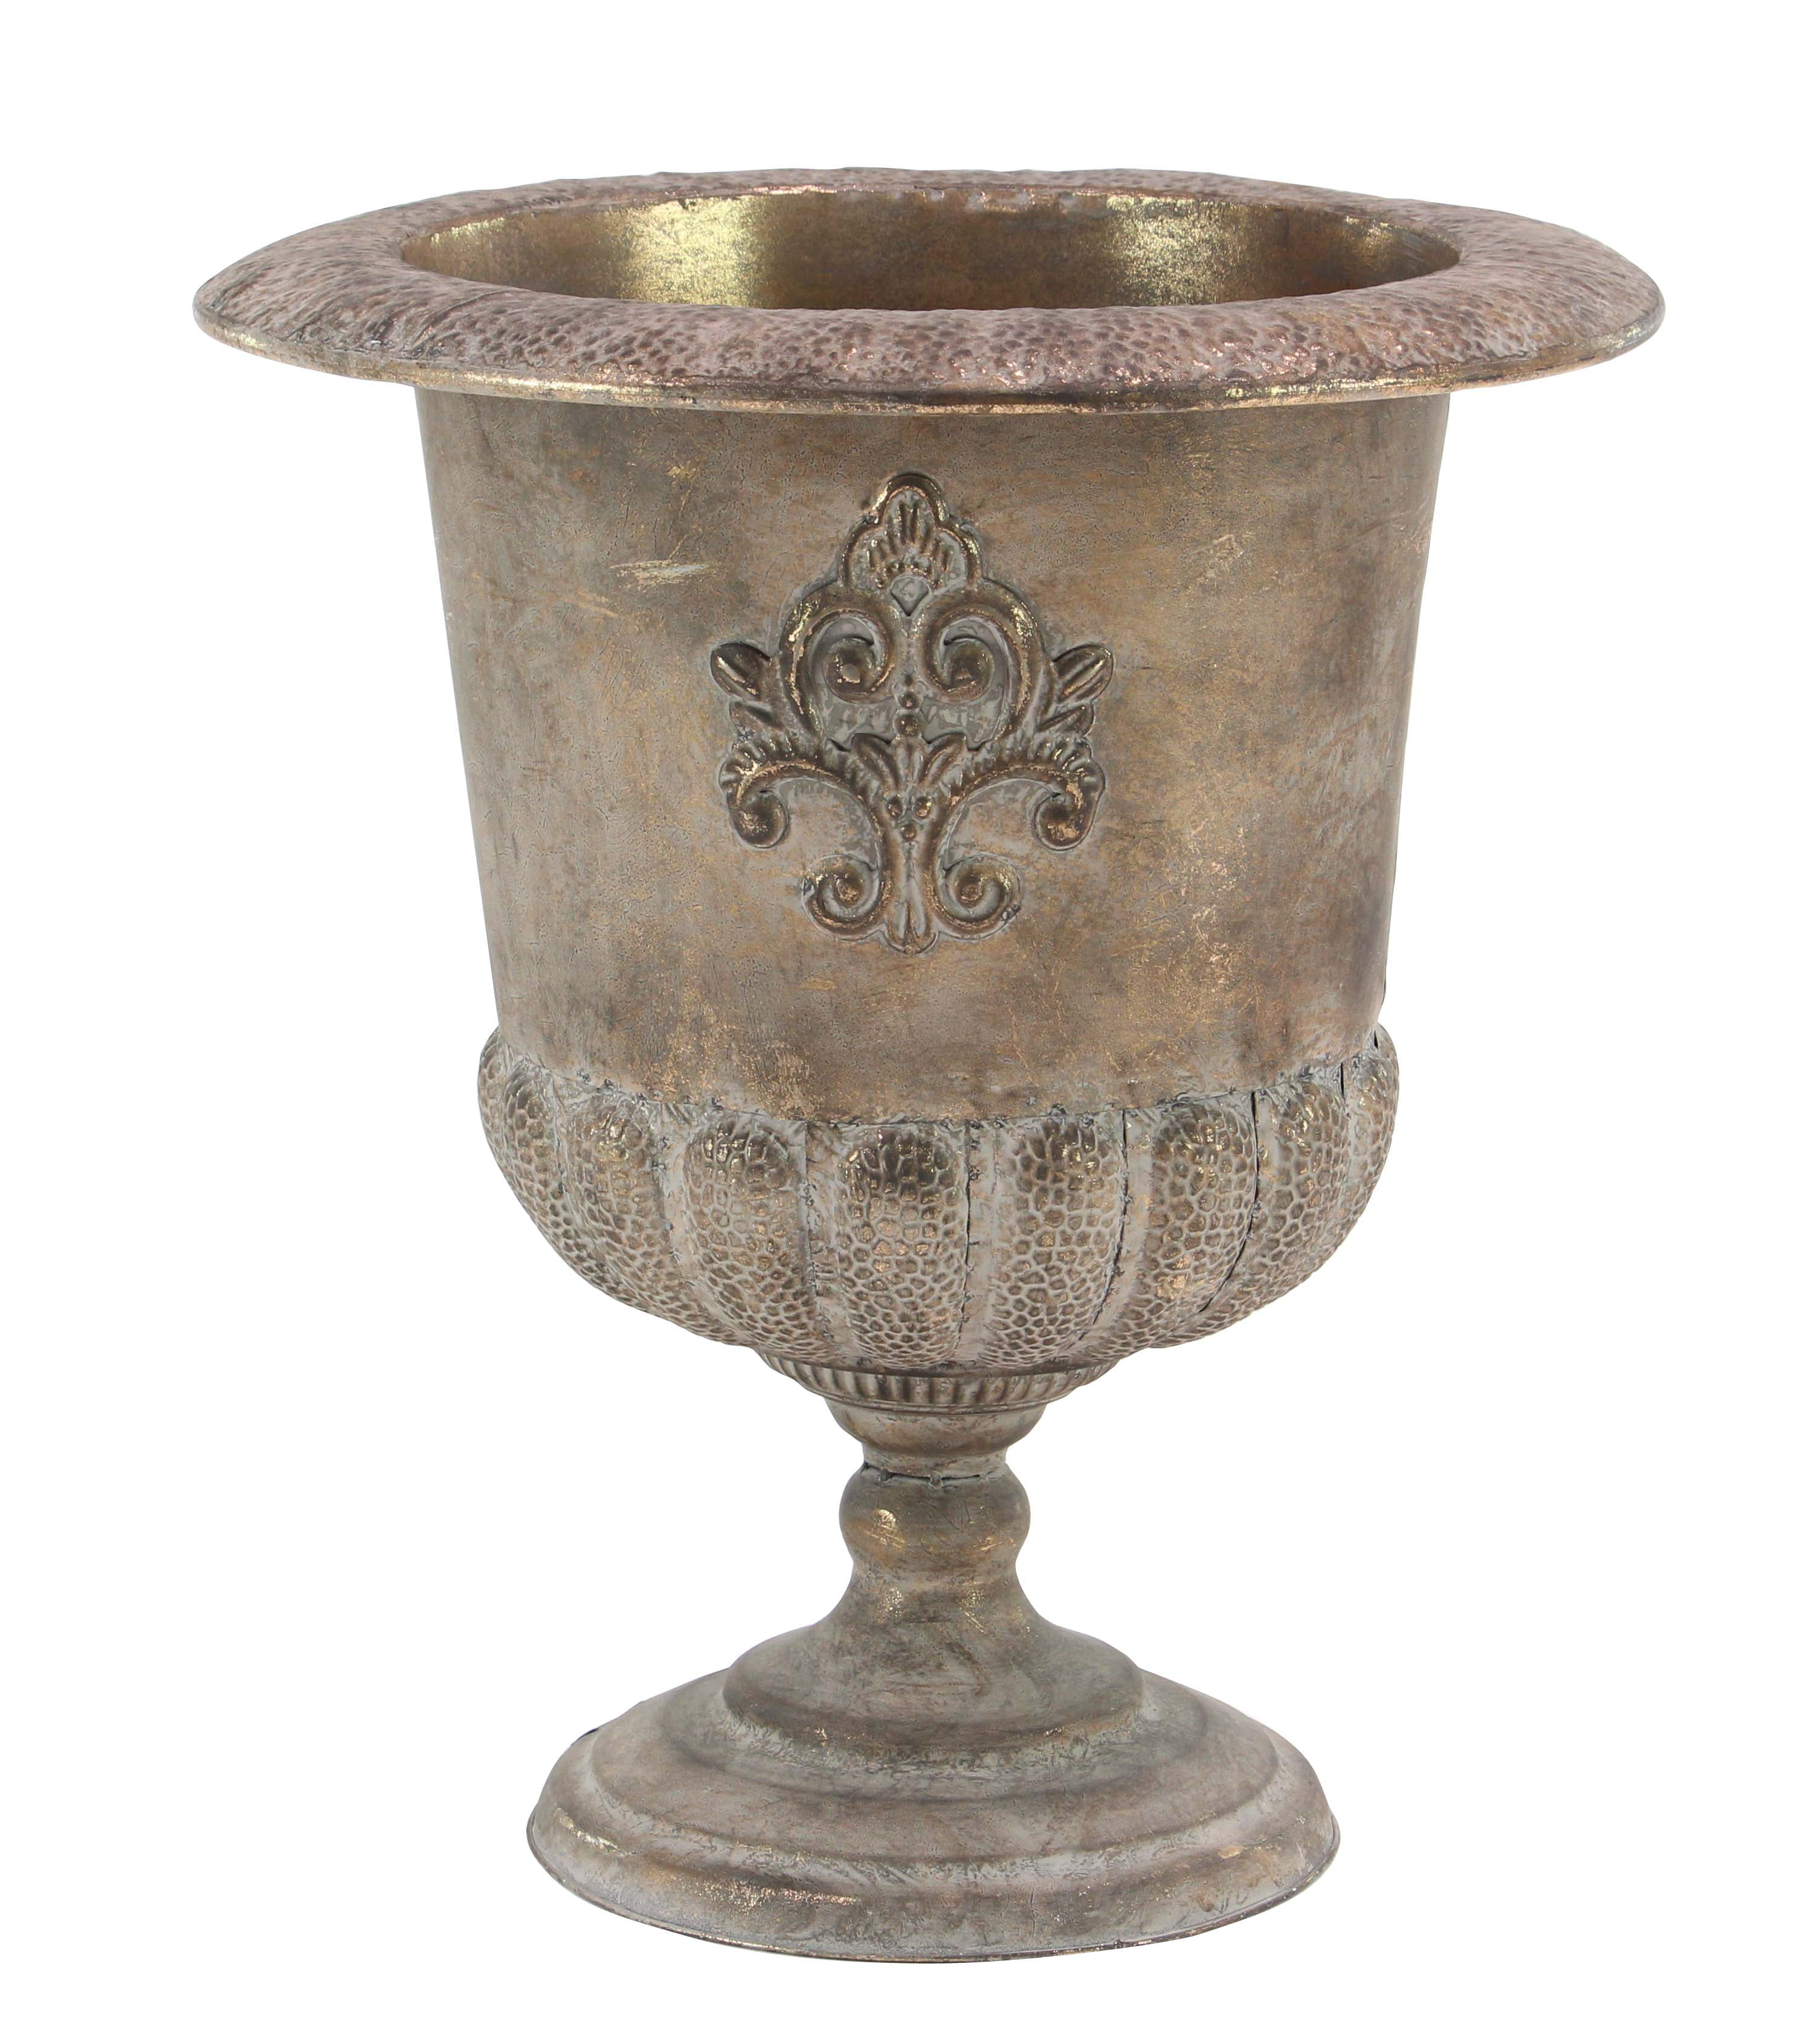 Decmode Traditional Iron Urn Planter With Scrollwork Design, Gold